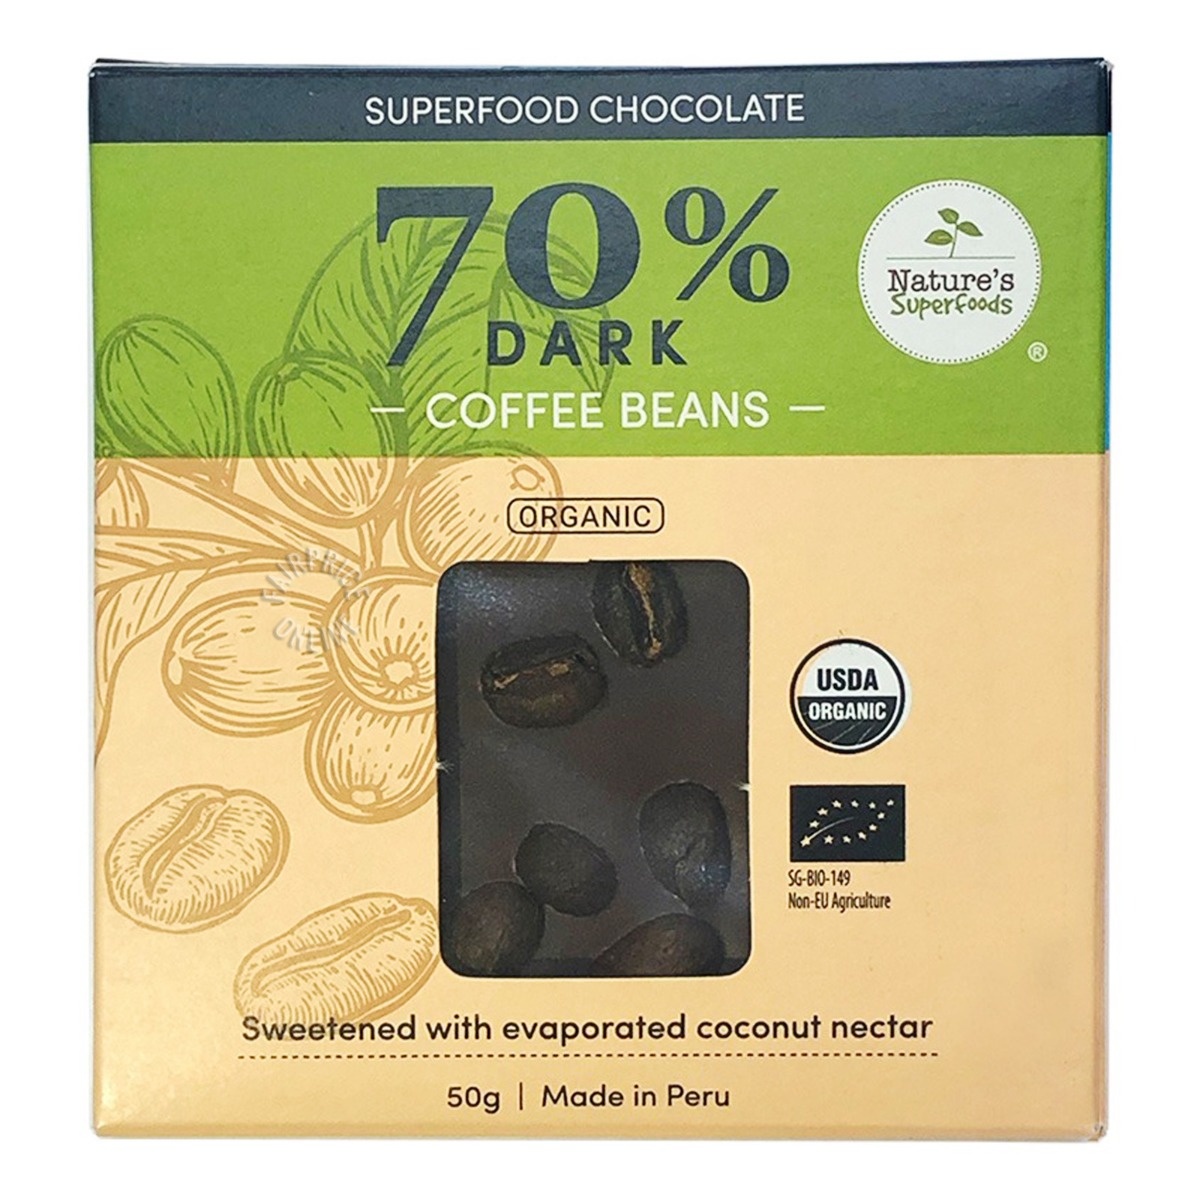 Organic Superfood Chocolate (70% Dark) with Coffee Beans front